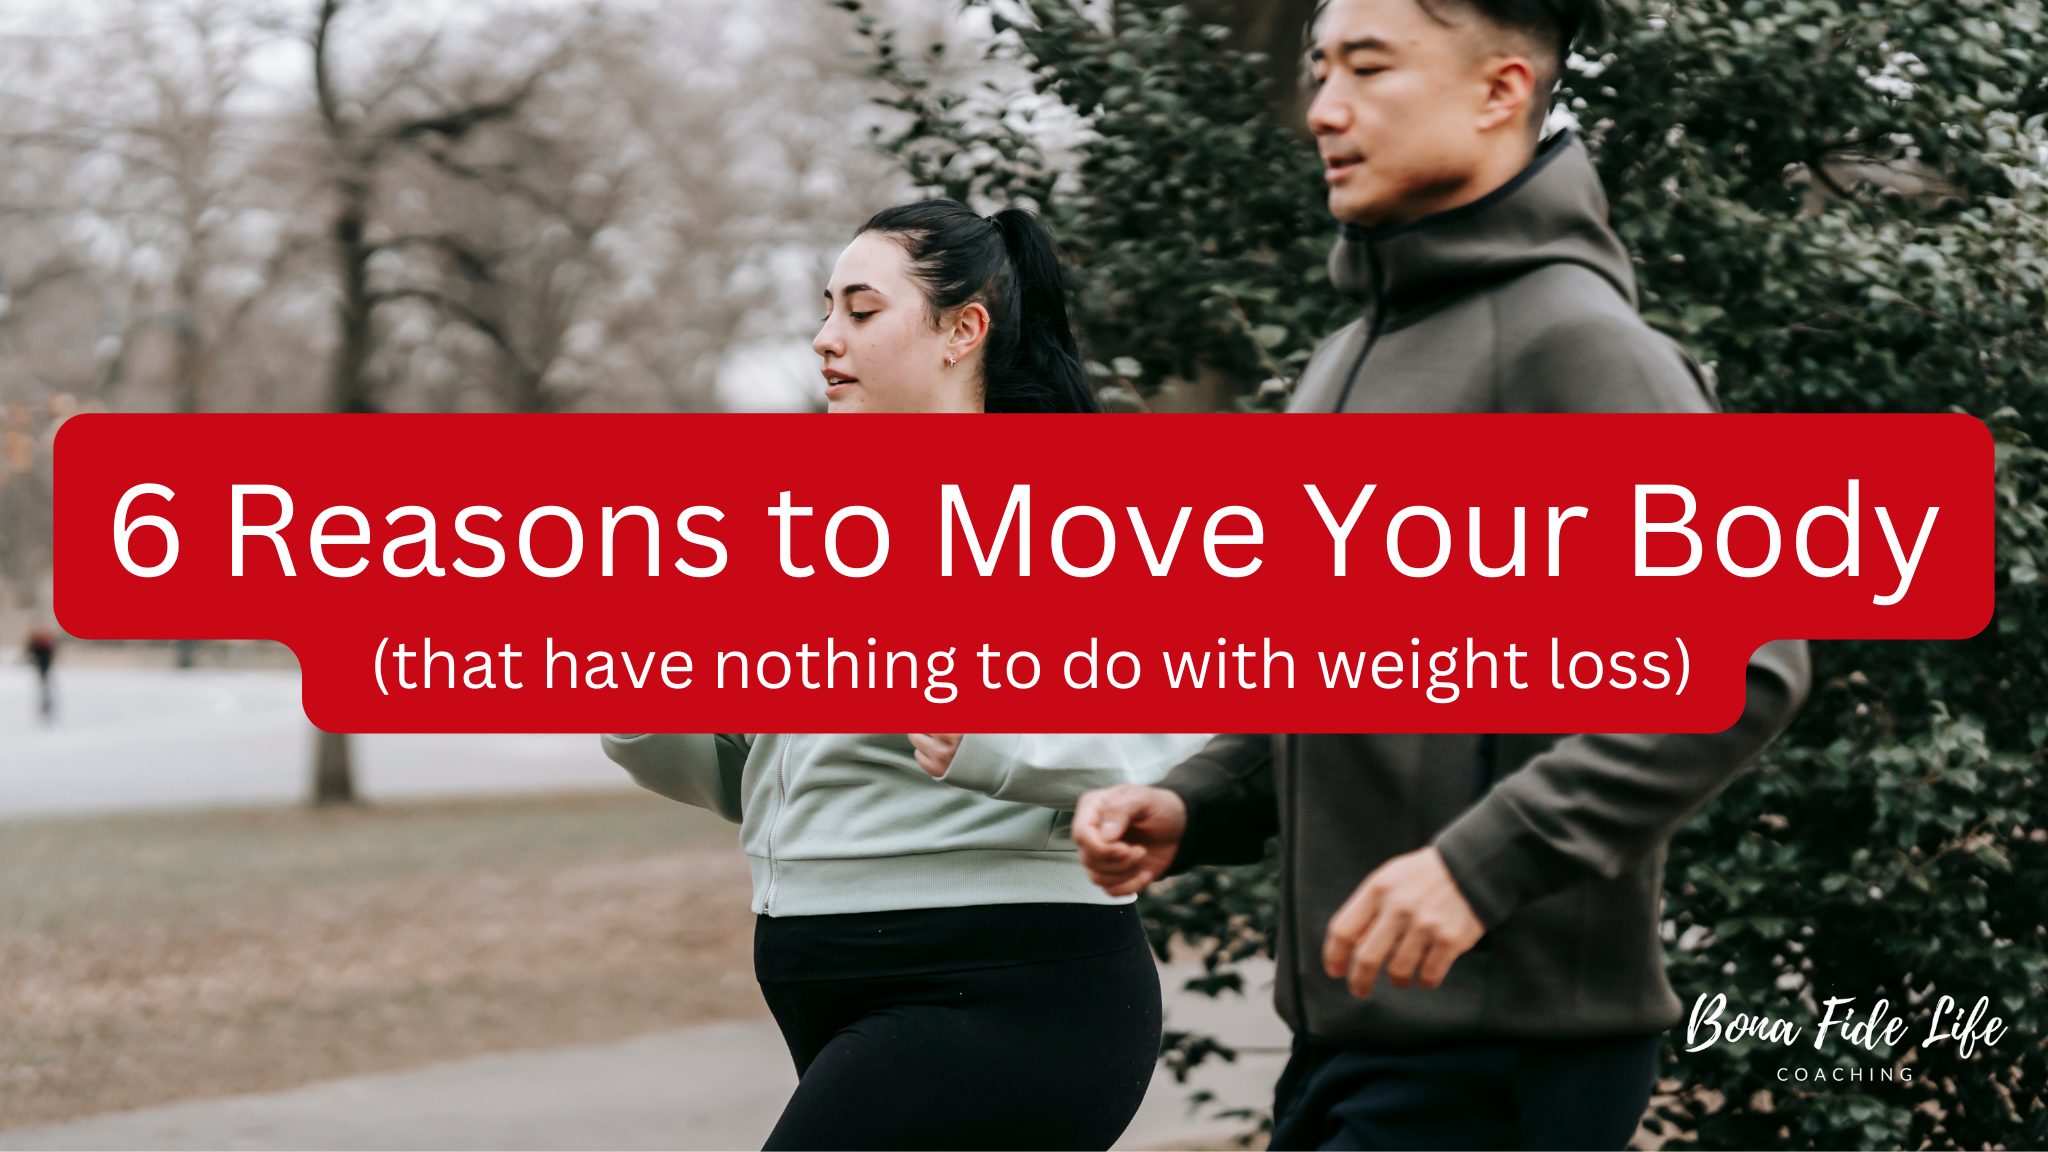 picture in background is of two people in athletic wear, walking side by side. on the left is a white woman with a dark brown ponytail; on the right is an Asian man. in the forefront is white lettering on a red background with the words: "6 reasons to move your body (that have nothing to do with weight loss)"